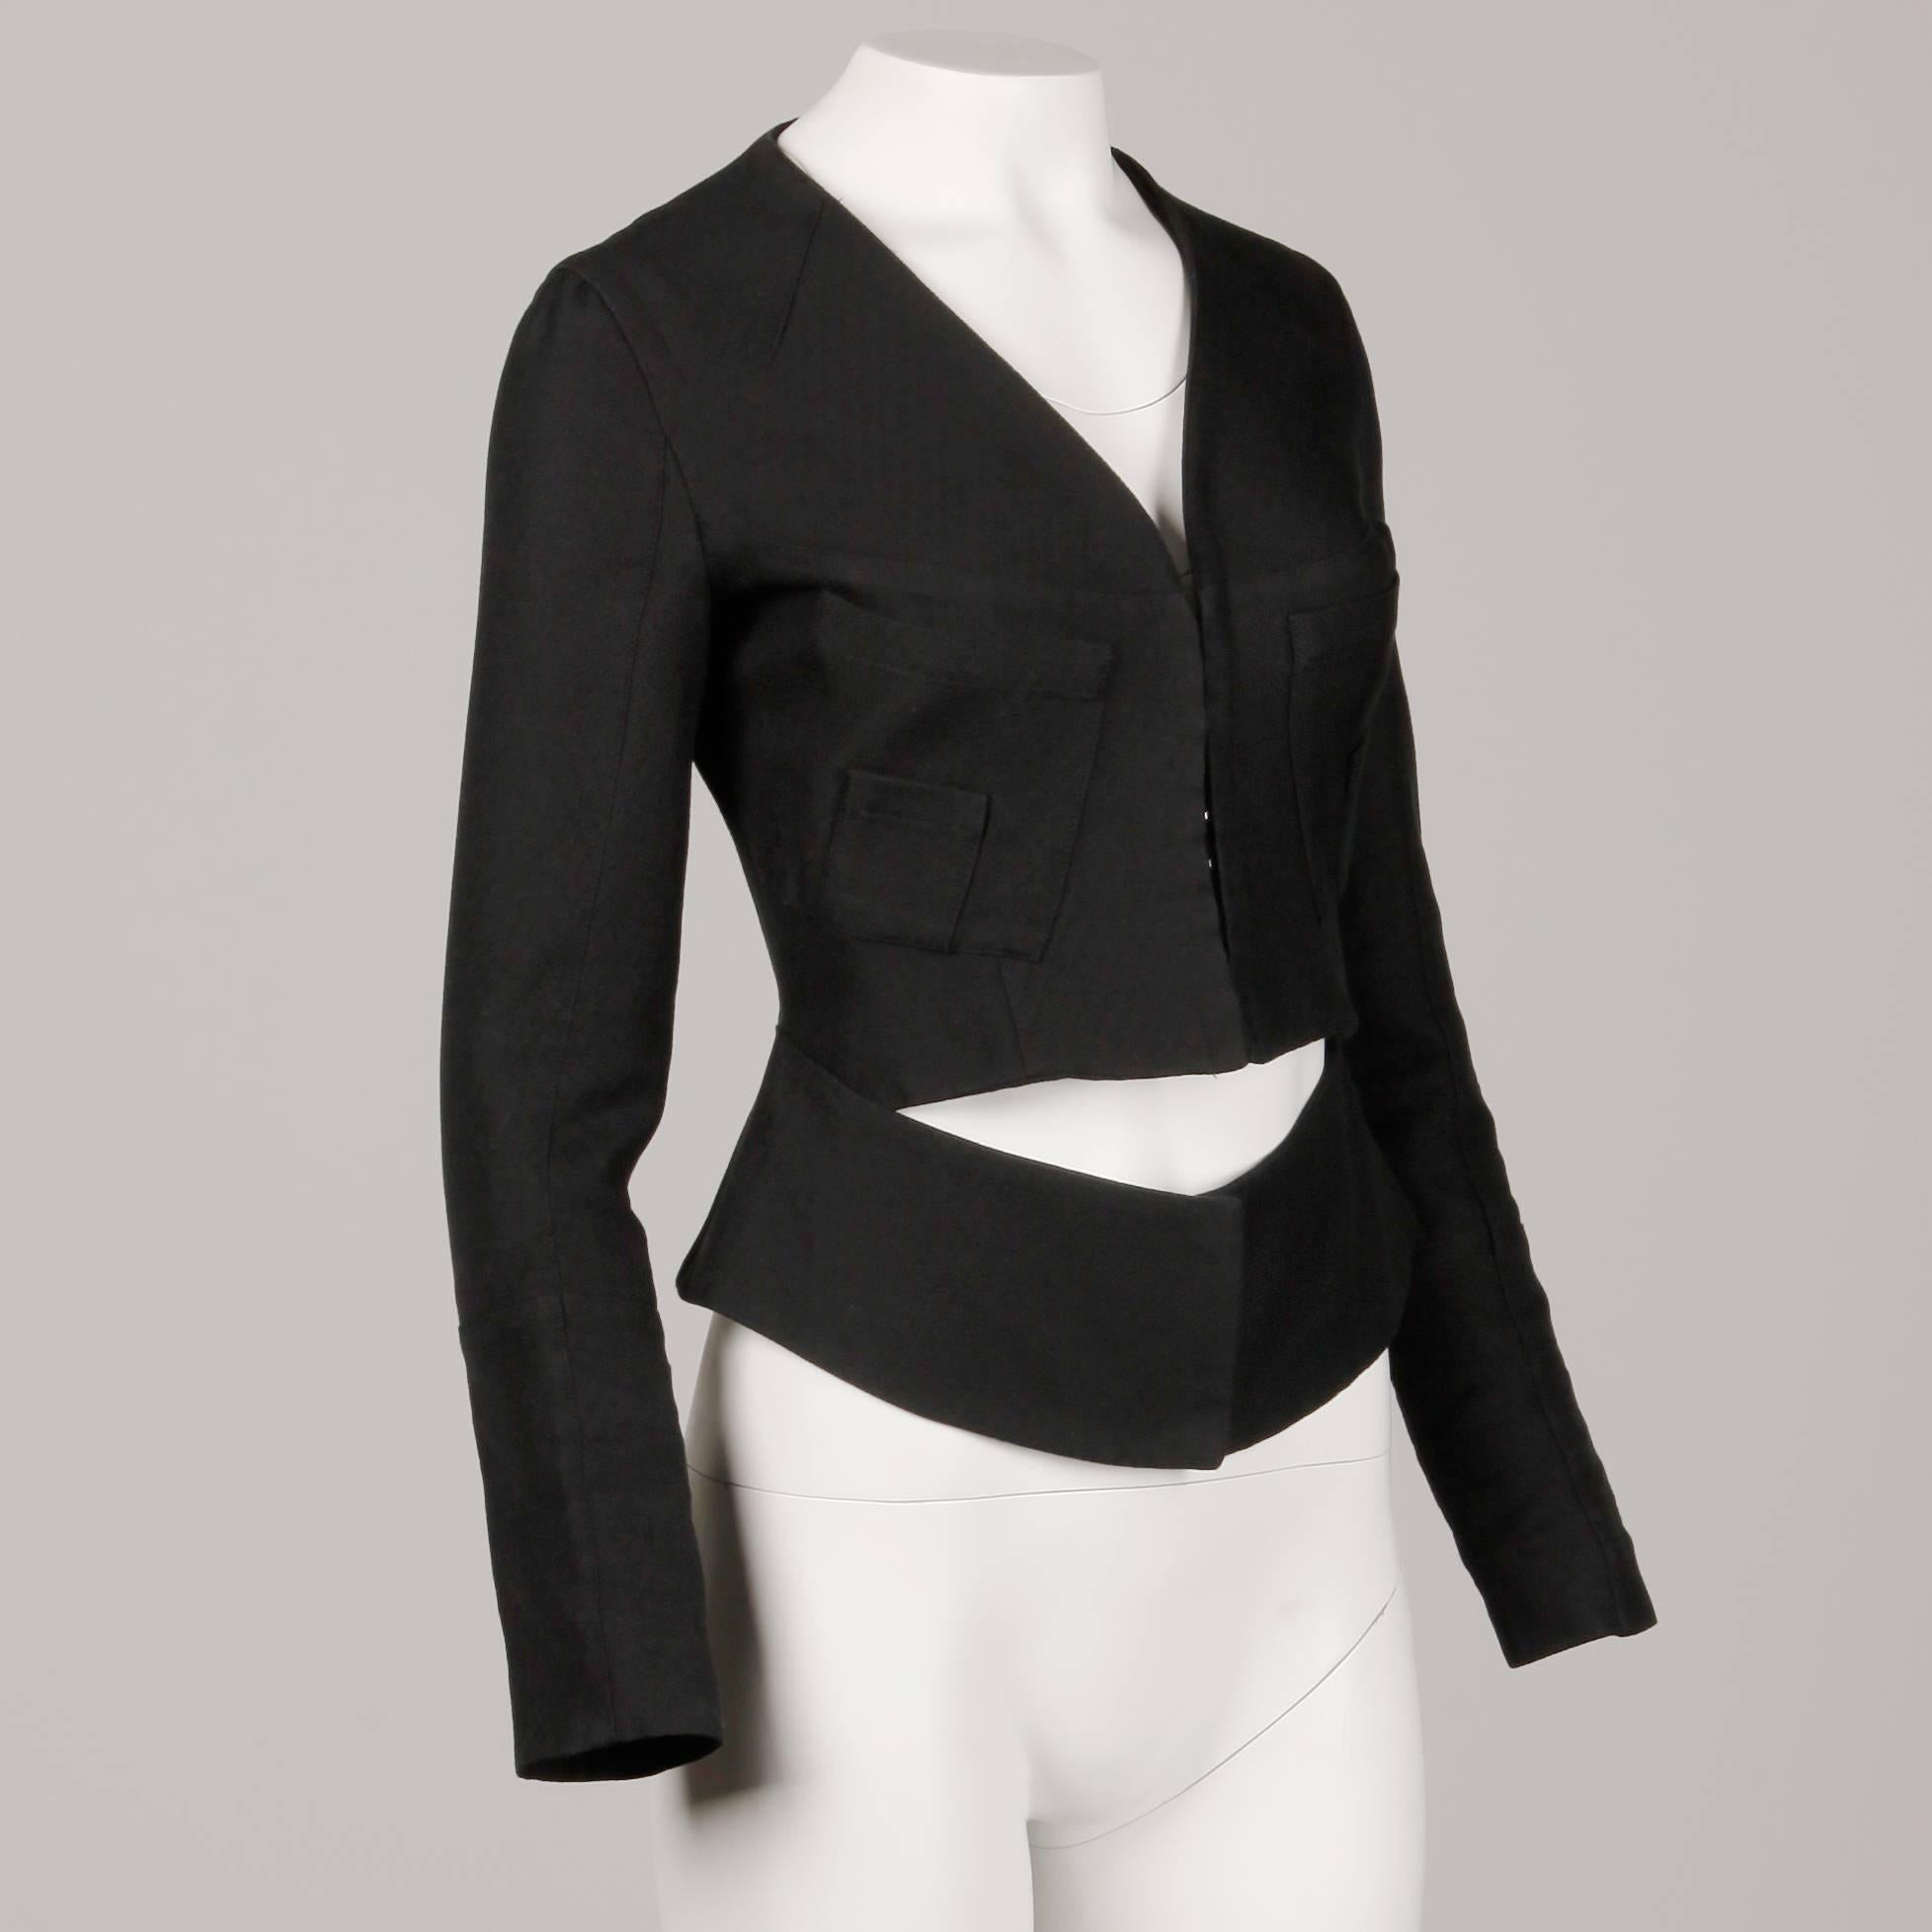 Unique black avant garde blazer jacket by Alessandro Dell'acqua. Unlined with front hook closure. Front patch pockets. 100% cotton. Marked size 40; fits like a size small. The bust measures 36